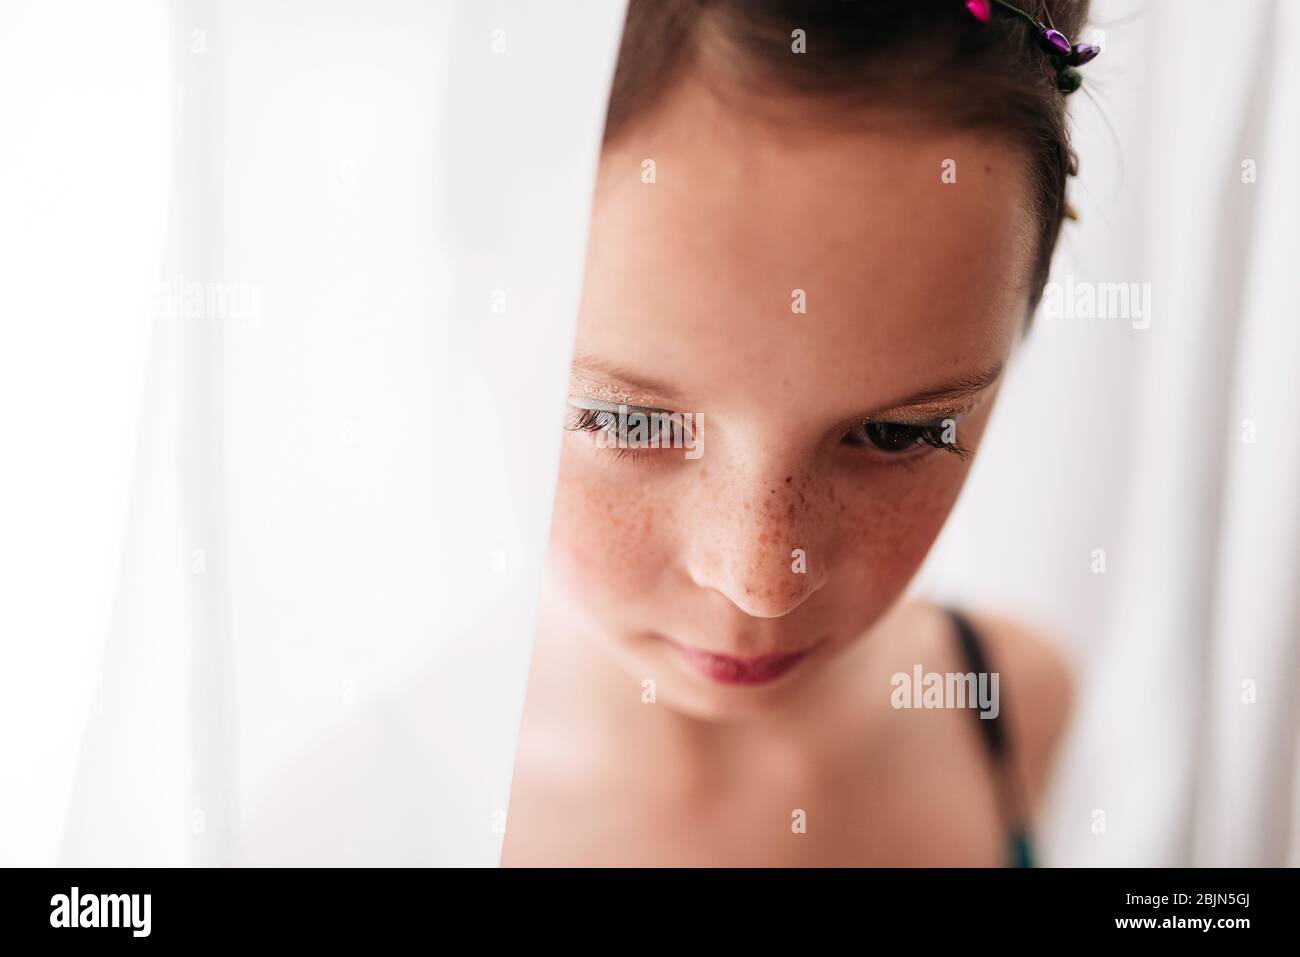 Portrait of a young girl wearing make-up standing by a curtain Stock Photo